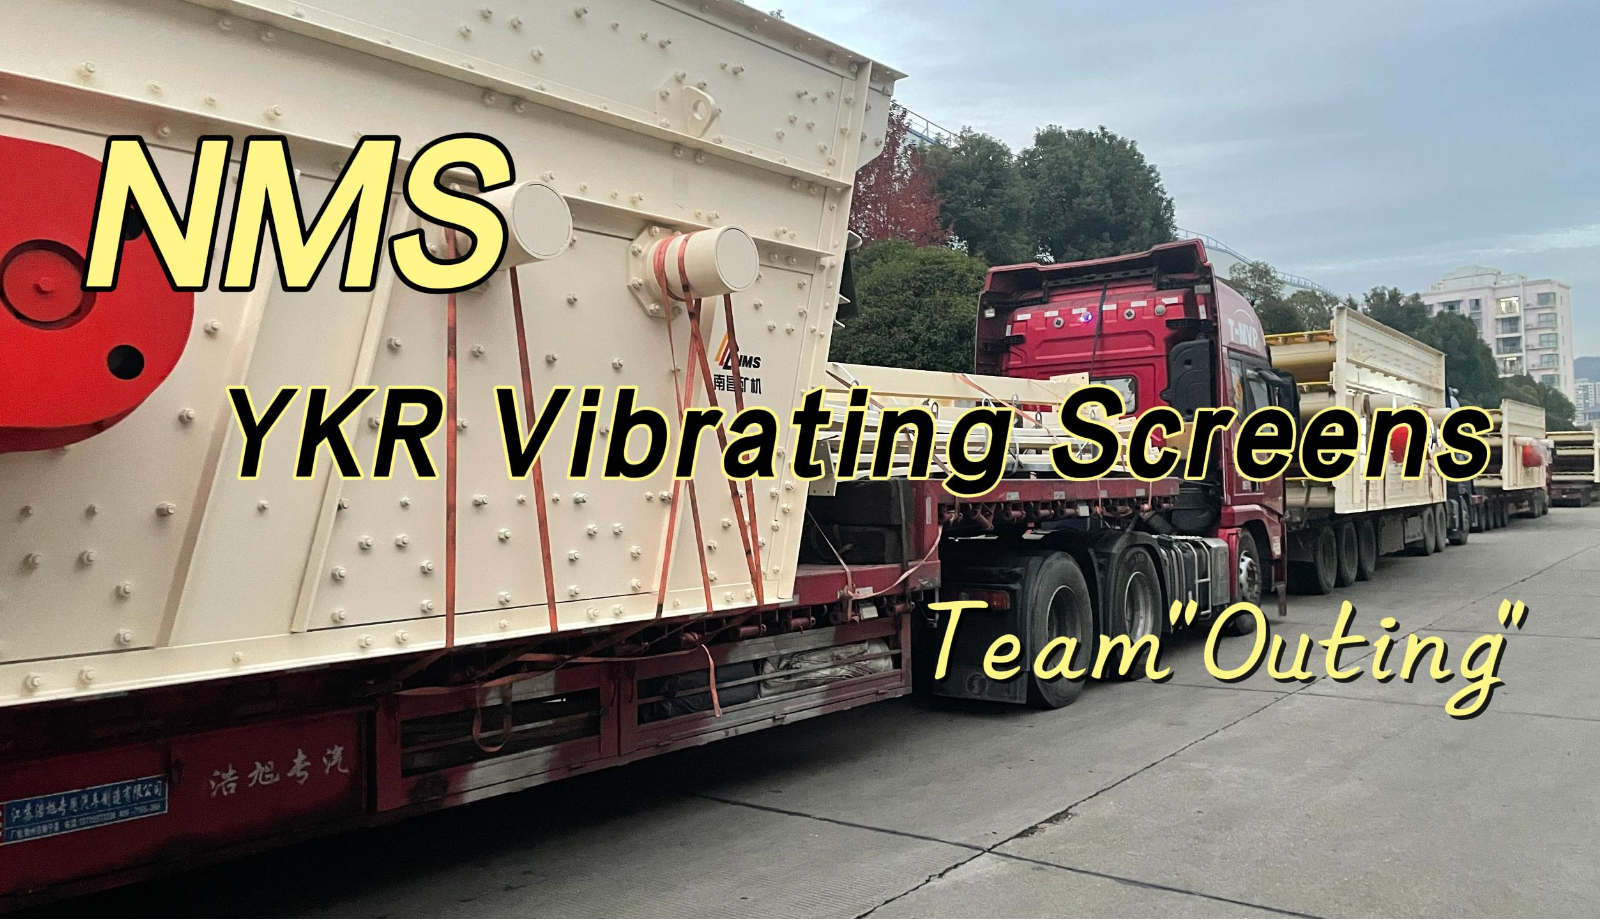 NMS YKR Vibrating Screens Team 